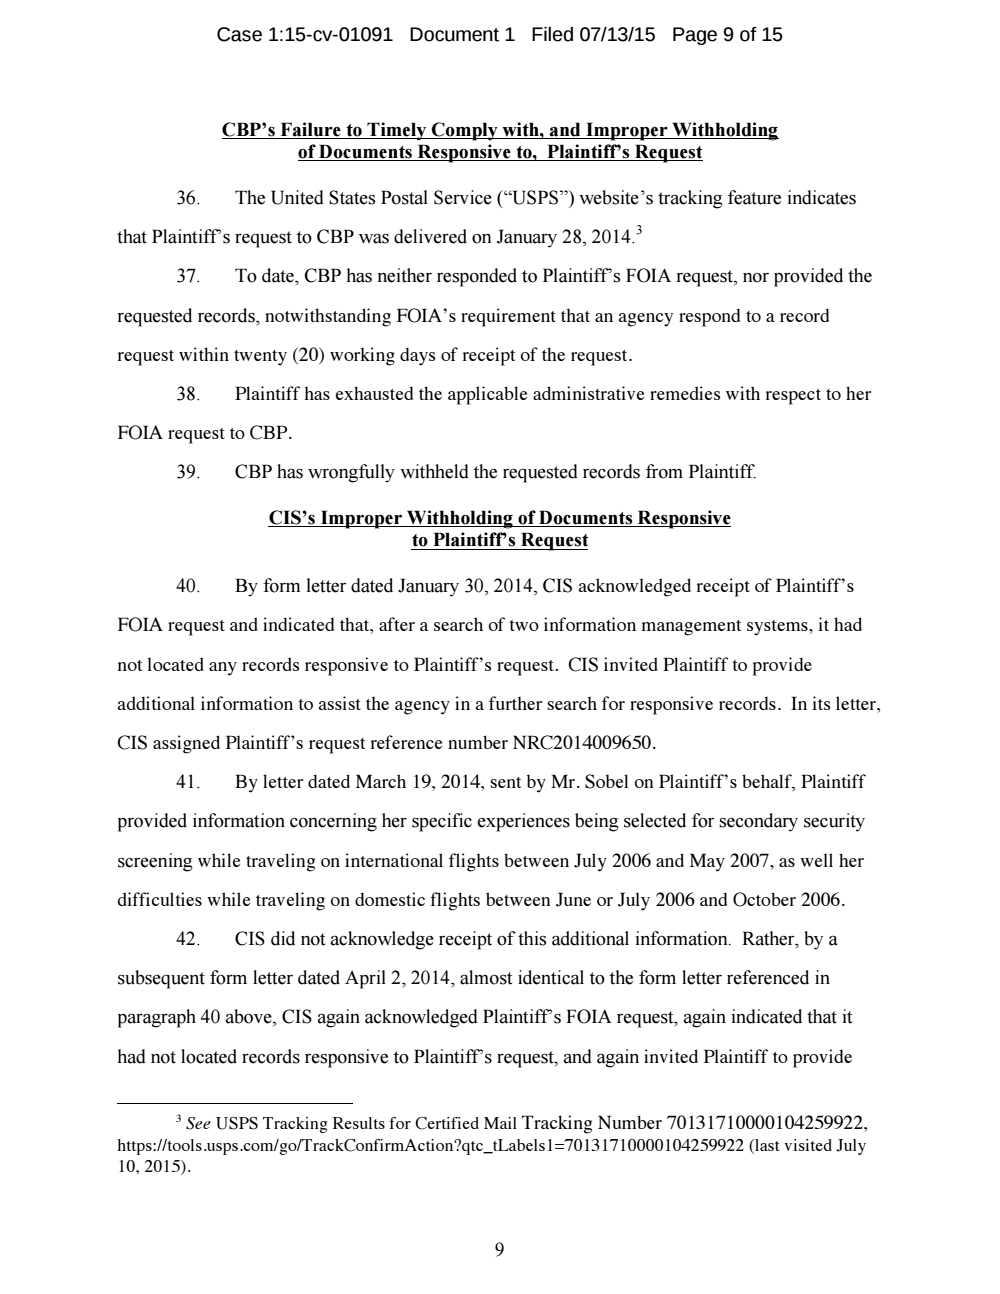 Page 9 from Laura Poitras FOIA Lawsuit